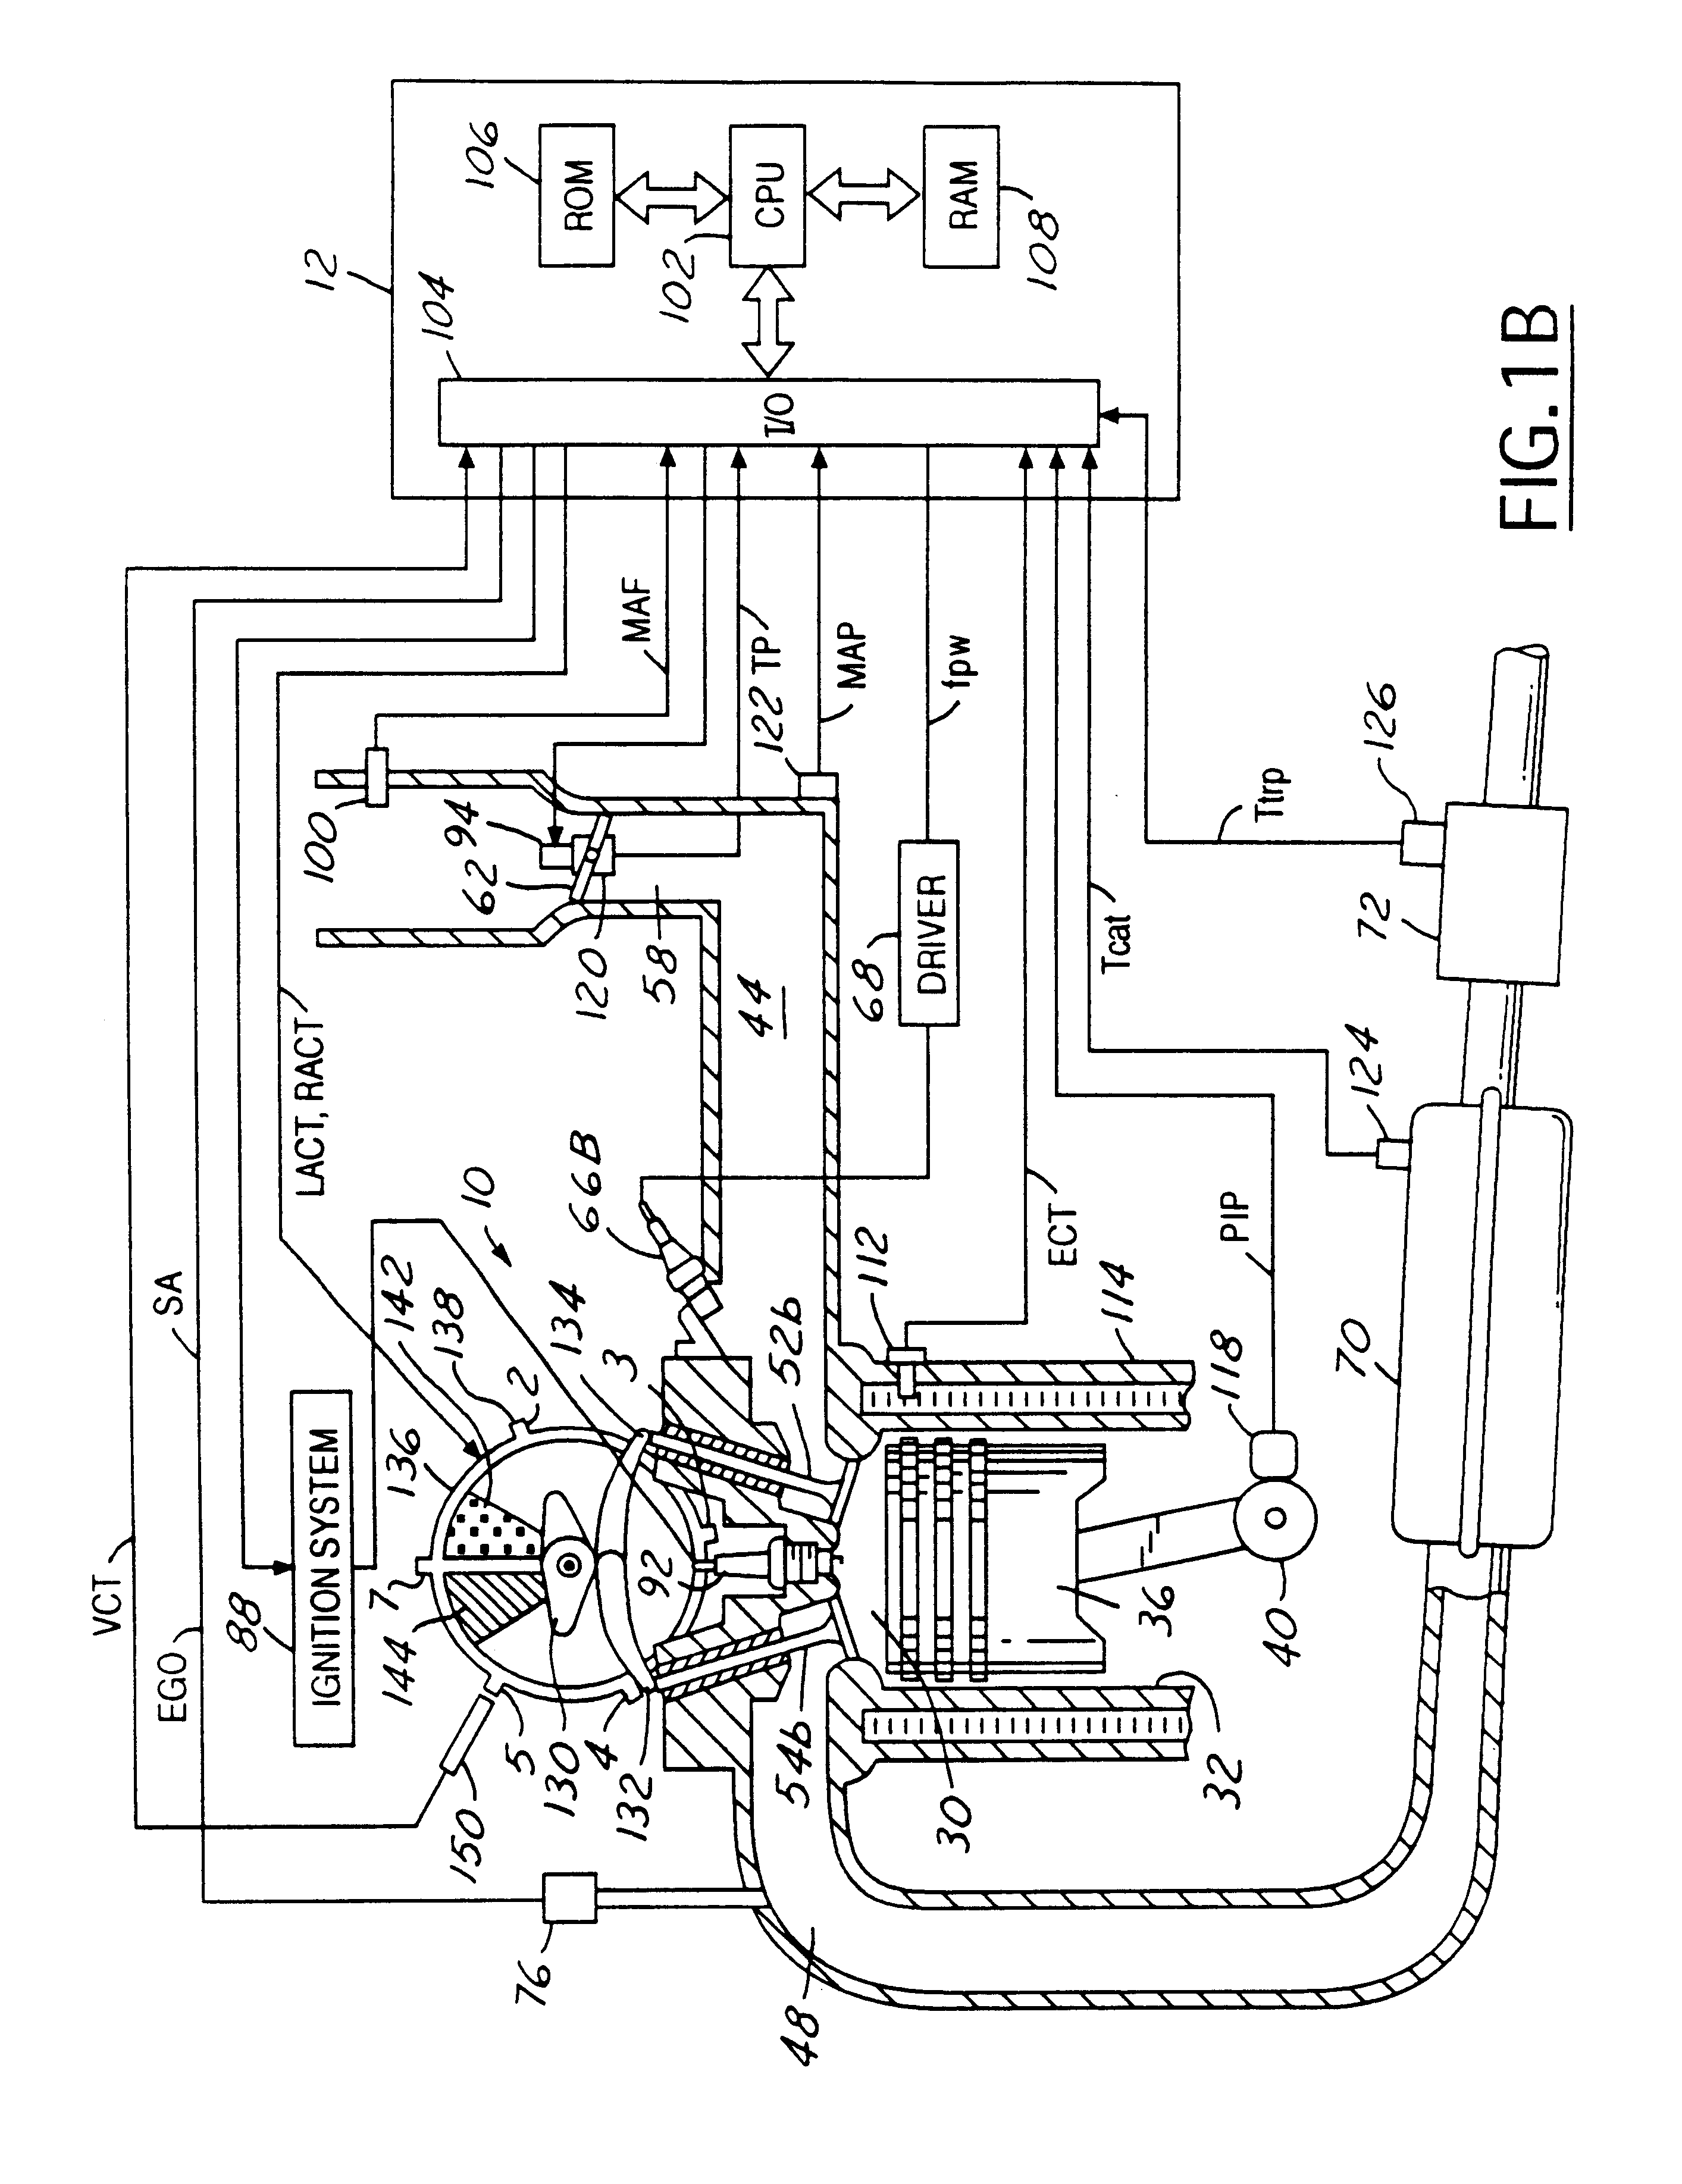 Control method for a vehicle having an engine